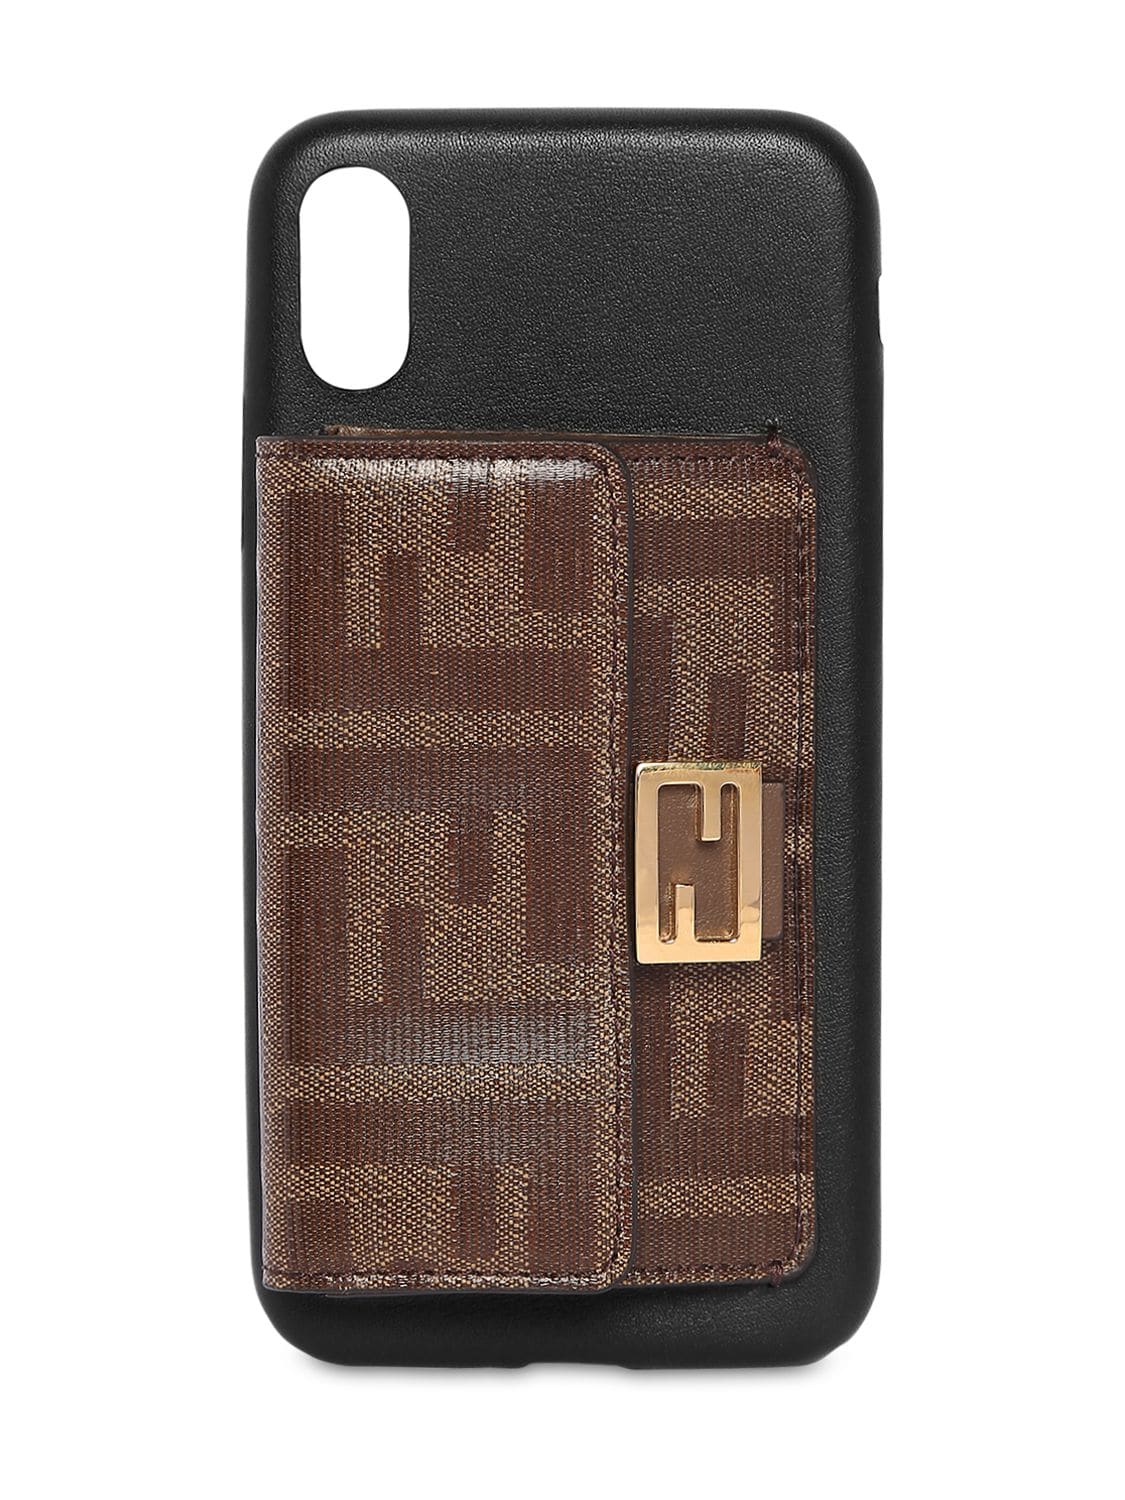 Leather Iphone X Cover